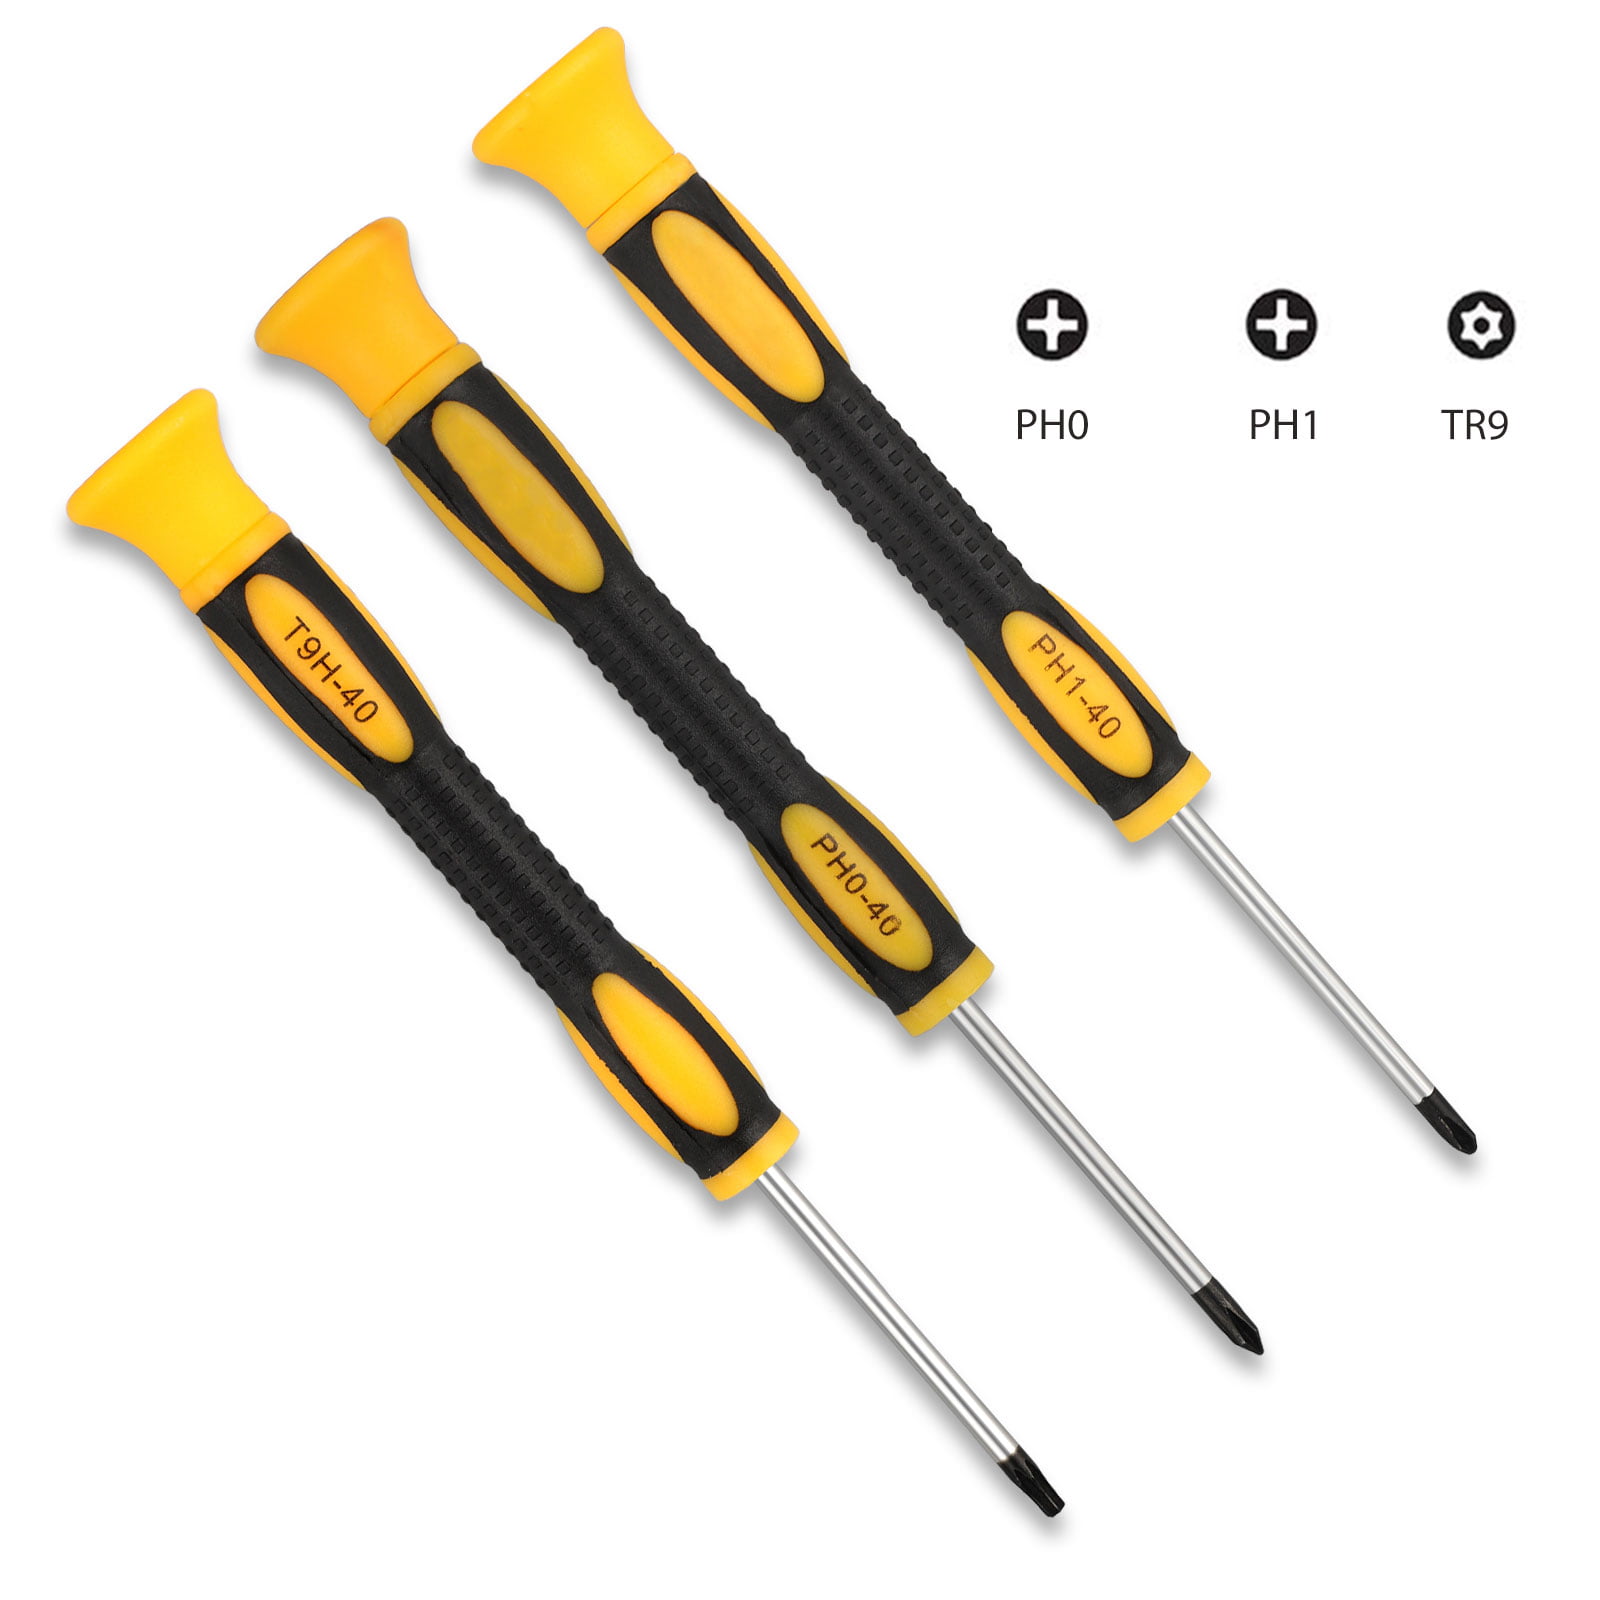 EEEkit Complete Screwdriver Set Repair Cleaning Tool Fit for Sony PlayStation 4, Security Torx Screwdriver T9 (TR9) Phillips PH0 PH1 for for Xbox One/Xbox Sony PS3/PS4 Controller/Console - Walmart.com